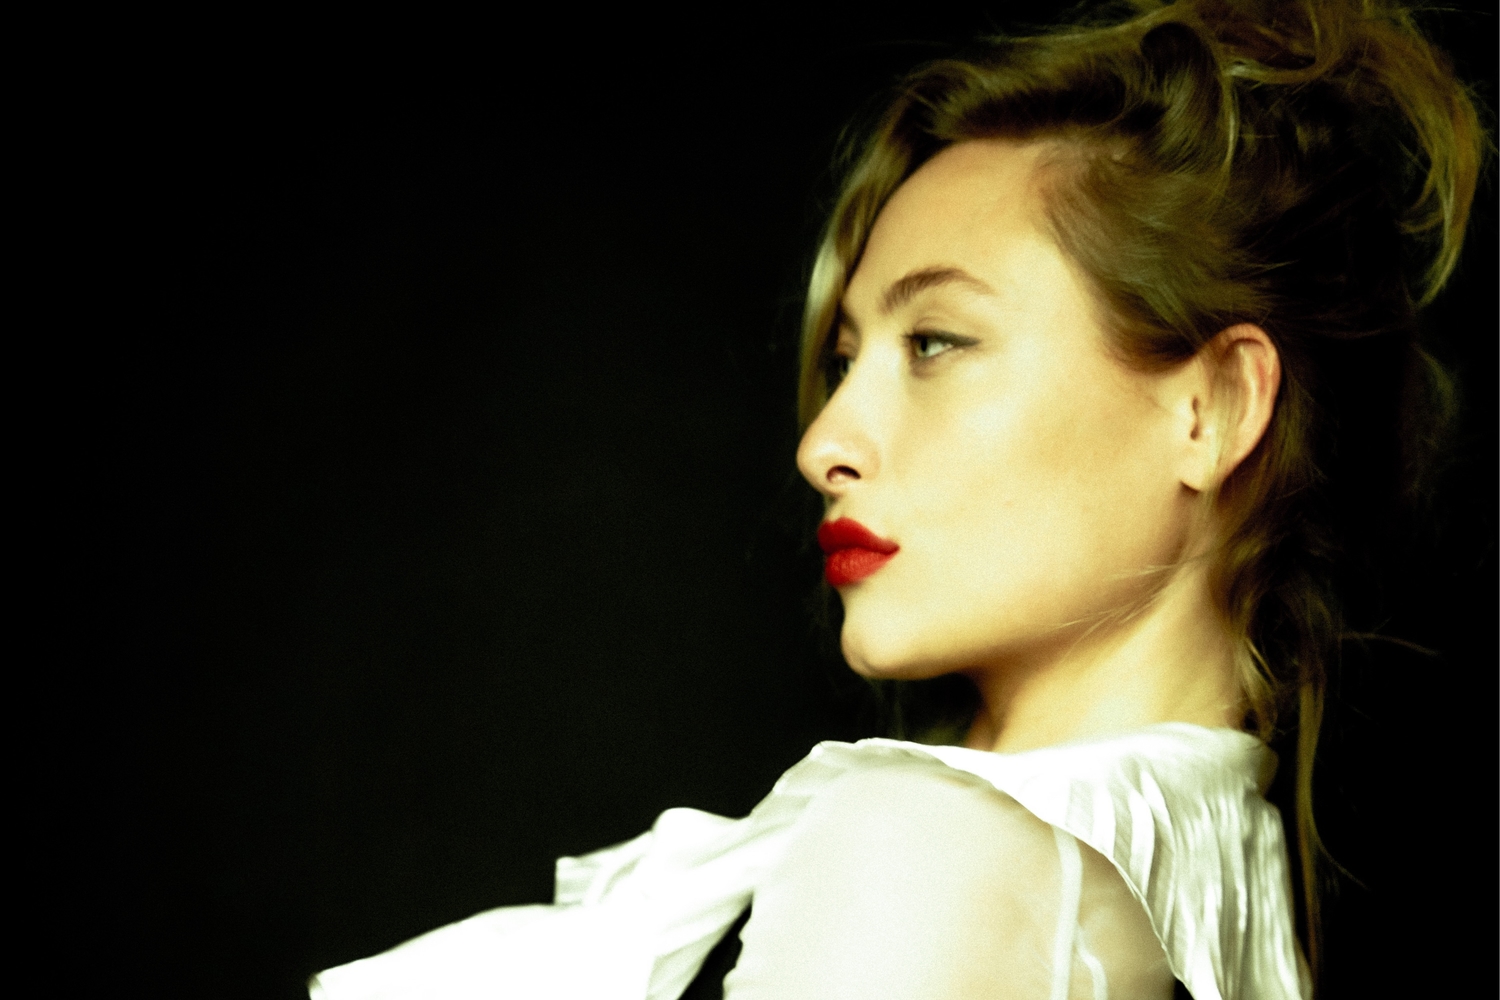 Samantha Urbani: “This album ended up being this intense, unexpected healing process”